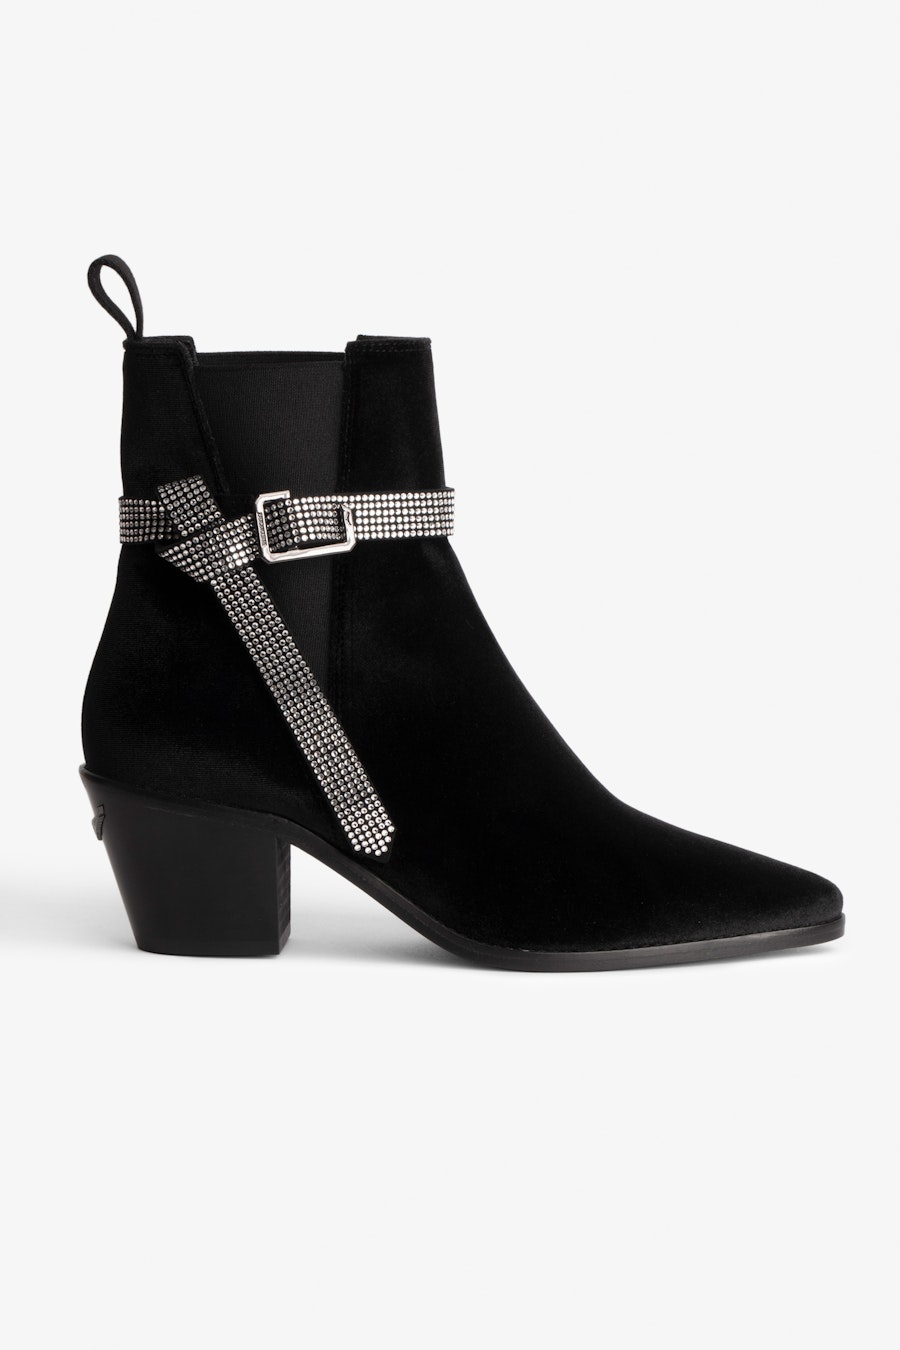 ZADIG&VOLTAIRE Tyler Cecilia Ankle Boots